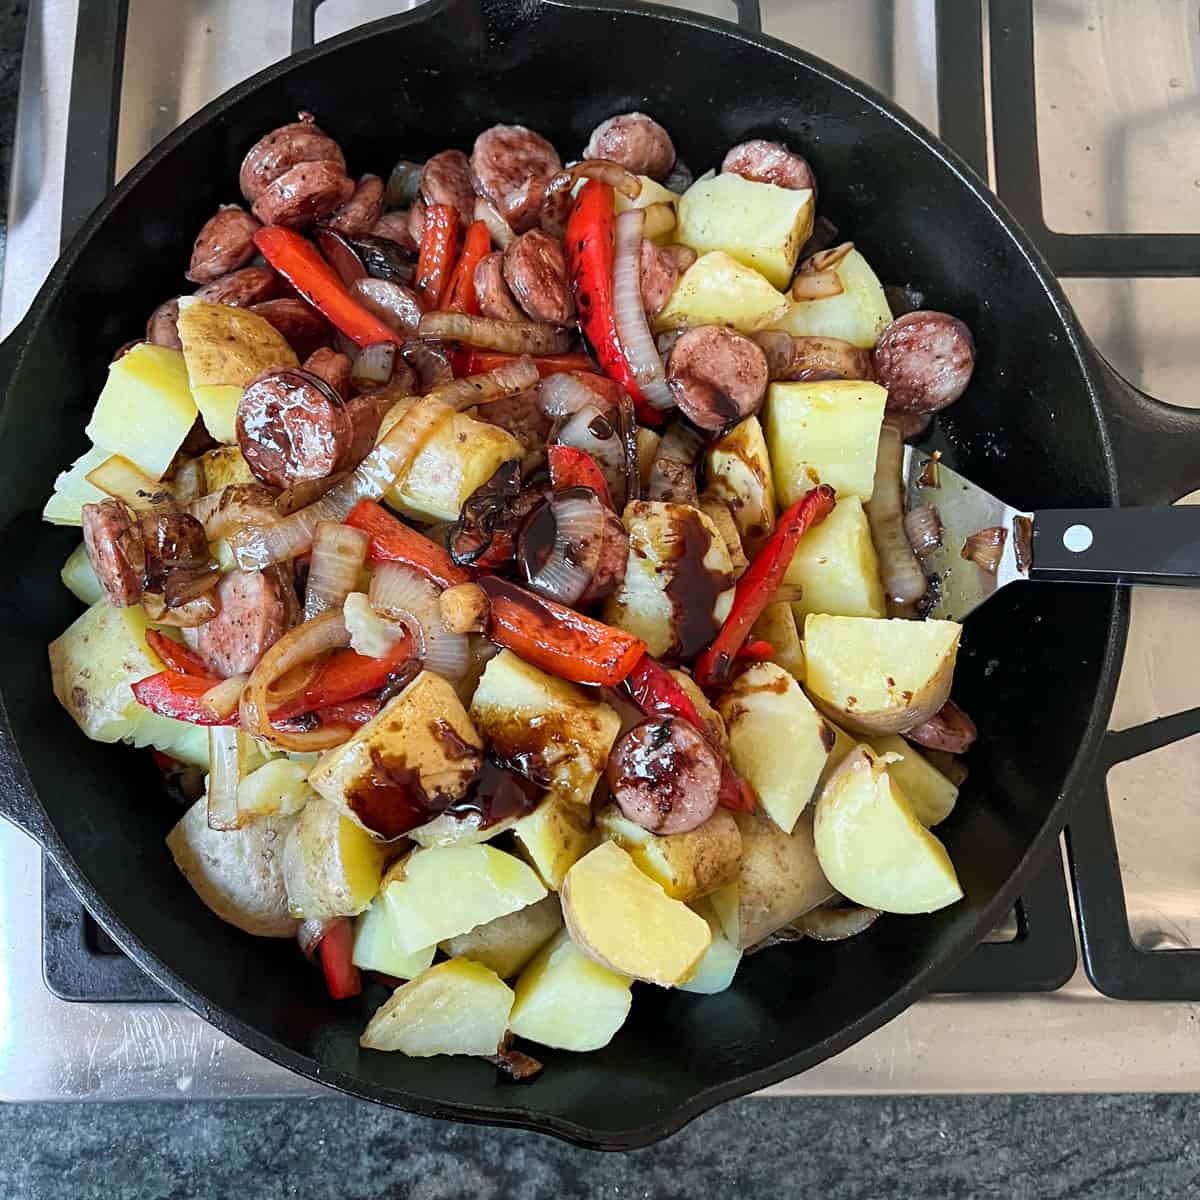 Metal spatula in a cast iron skillet filled with bites sized chunks of boiled potato, strips of red peppers and onions, sauteed sausages and drizzled of pomegranate molasses.